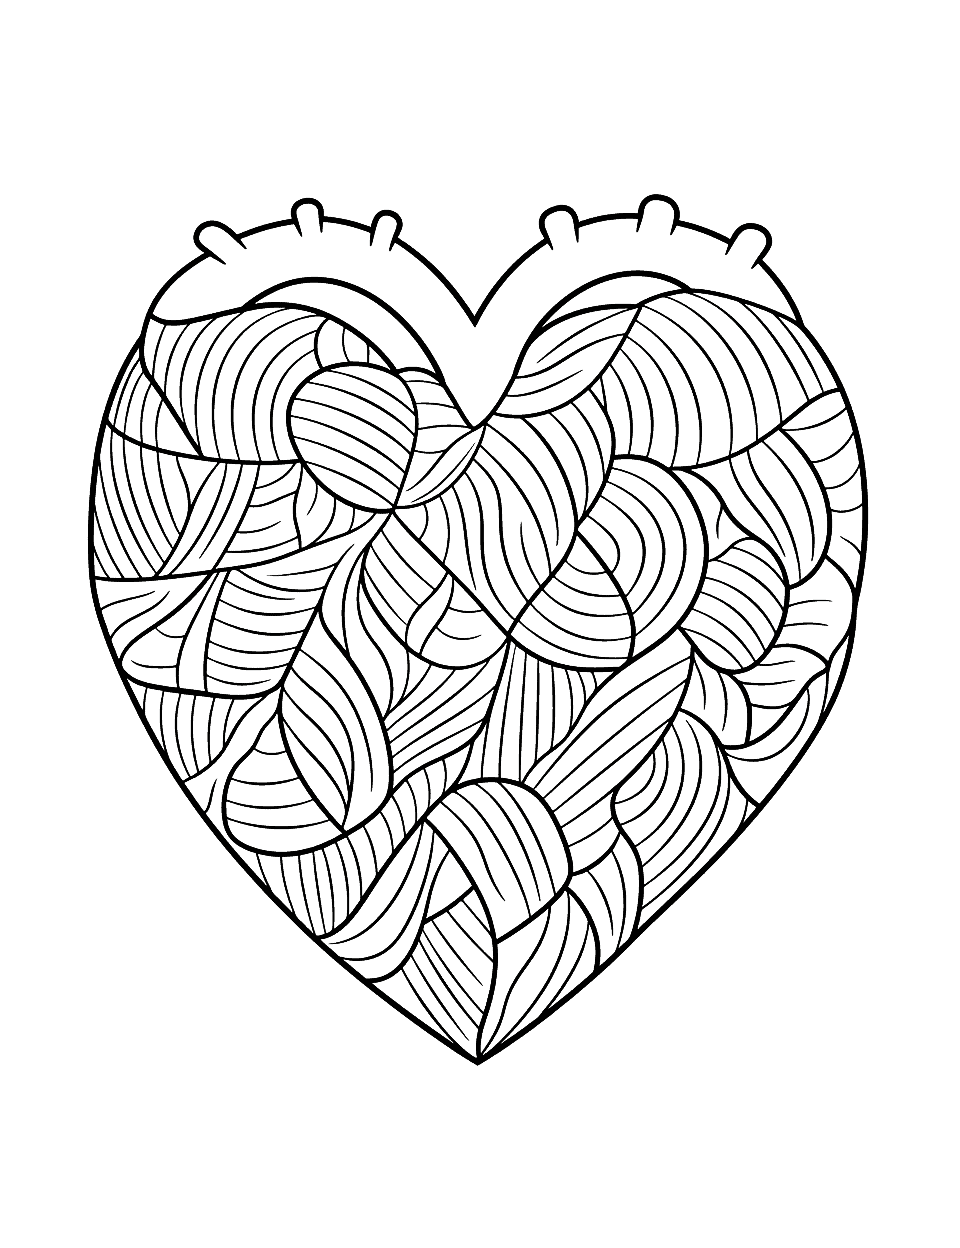 Human Heart Diagram Coloring Page - A detailed human heart diagram for children interested in science and biology.